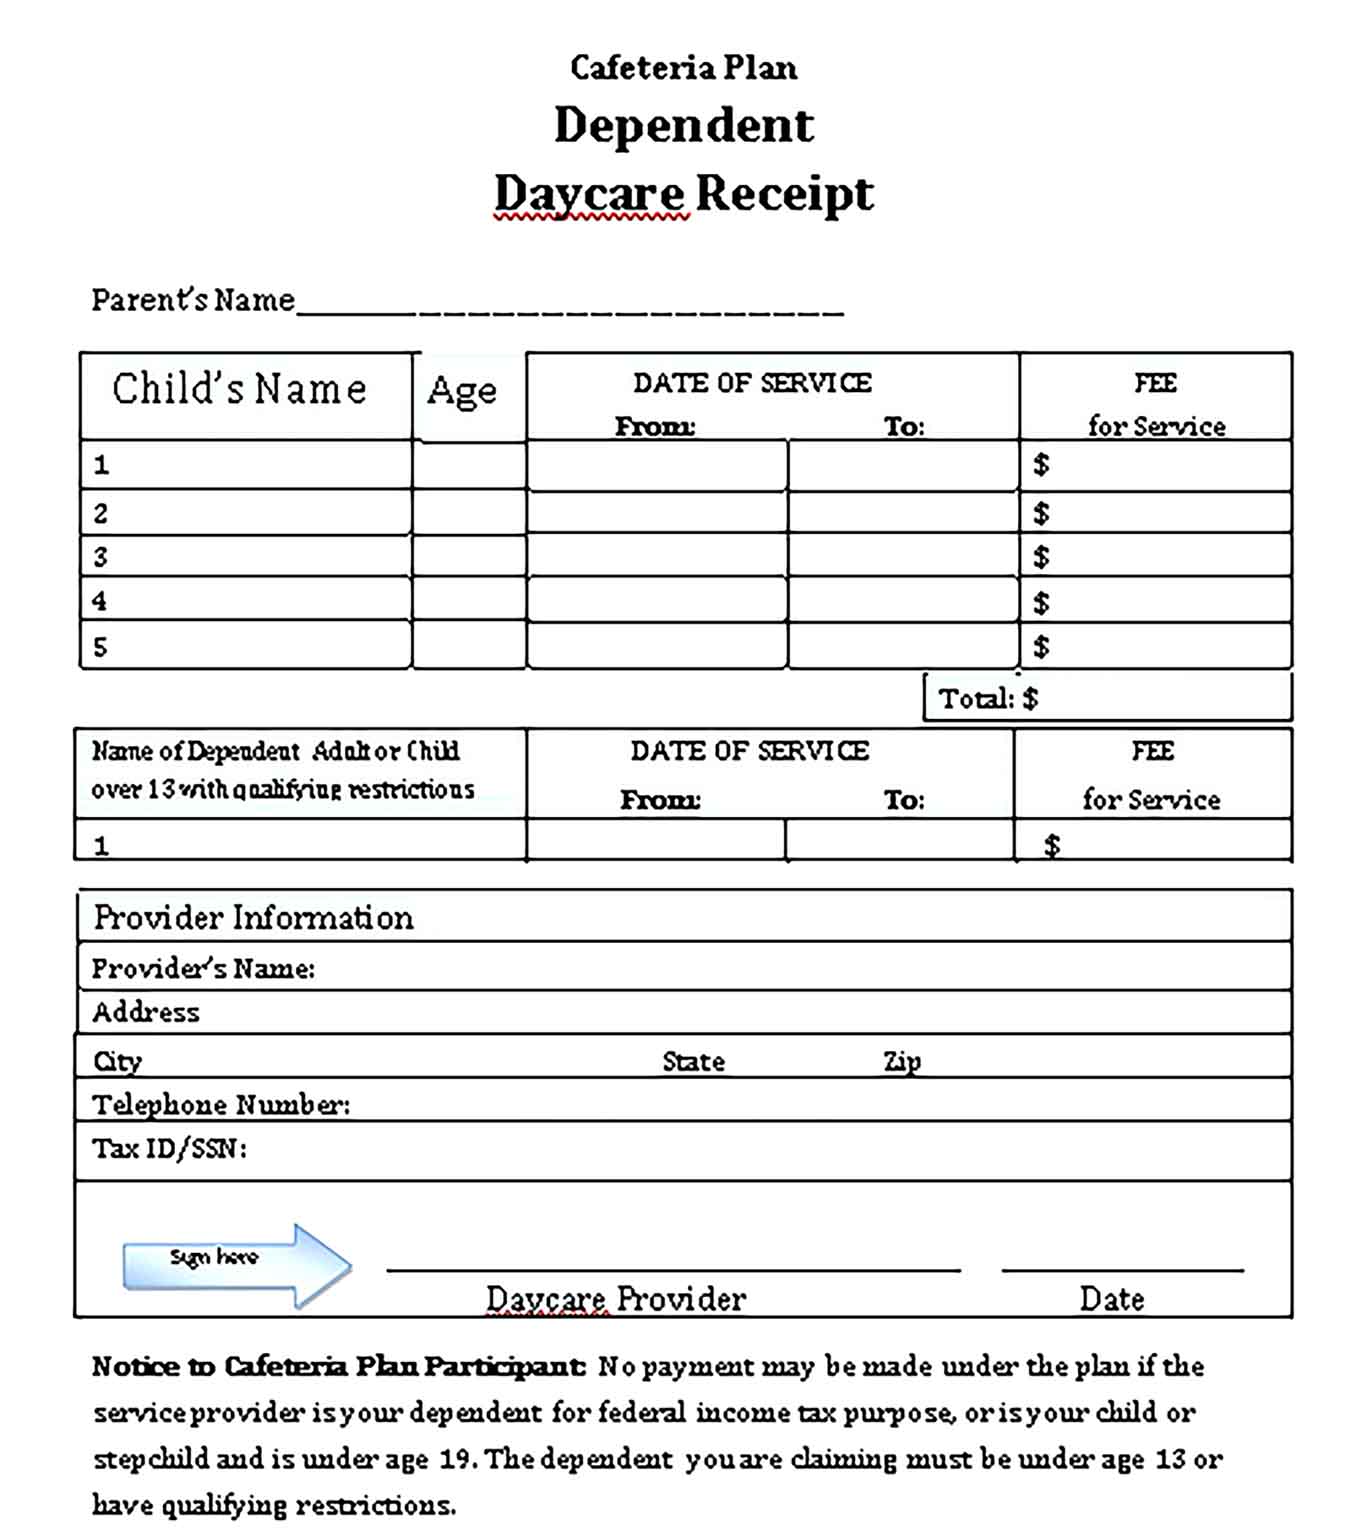 Sample Dependent Daycare Receipt 1 001 Templates